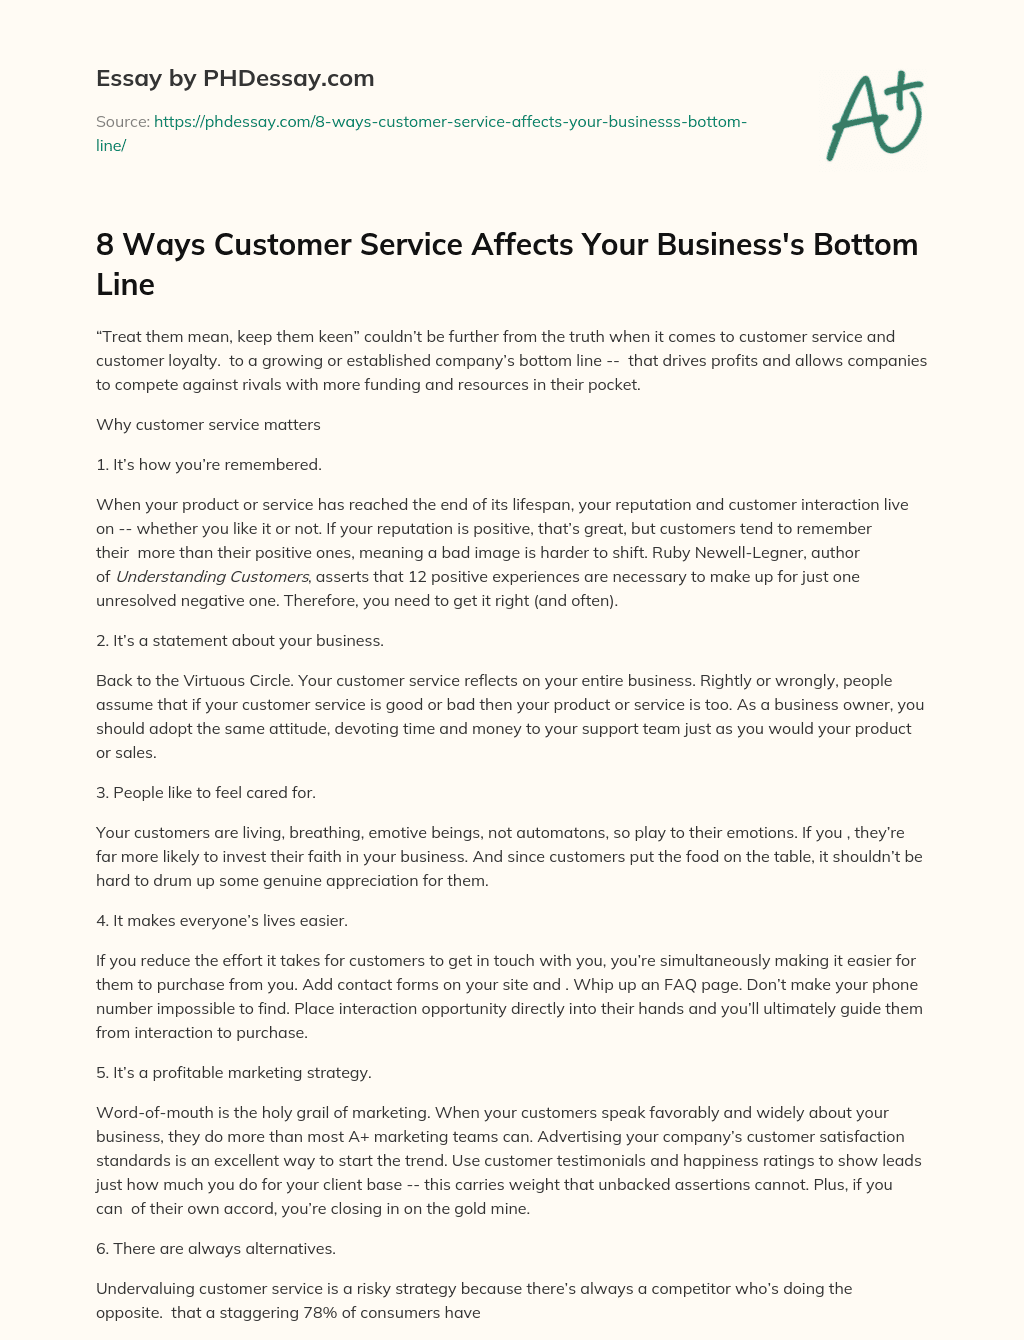 8 Ways Customer Service Affects Your Business’s Bottom Line essay